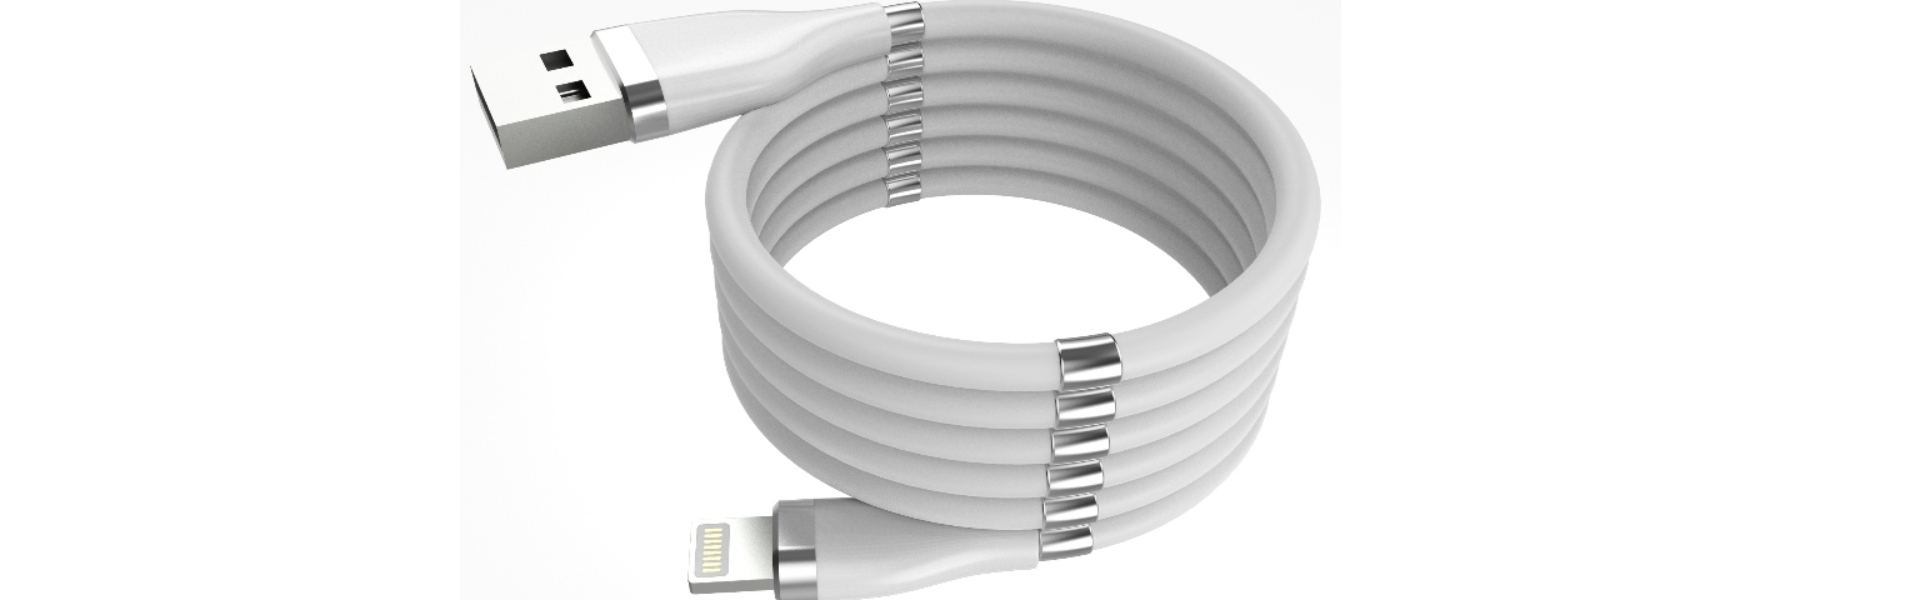 usb cable,usb data cable,data cable,Dong Guan Rong Pin Electronic Technology Co.Ltd